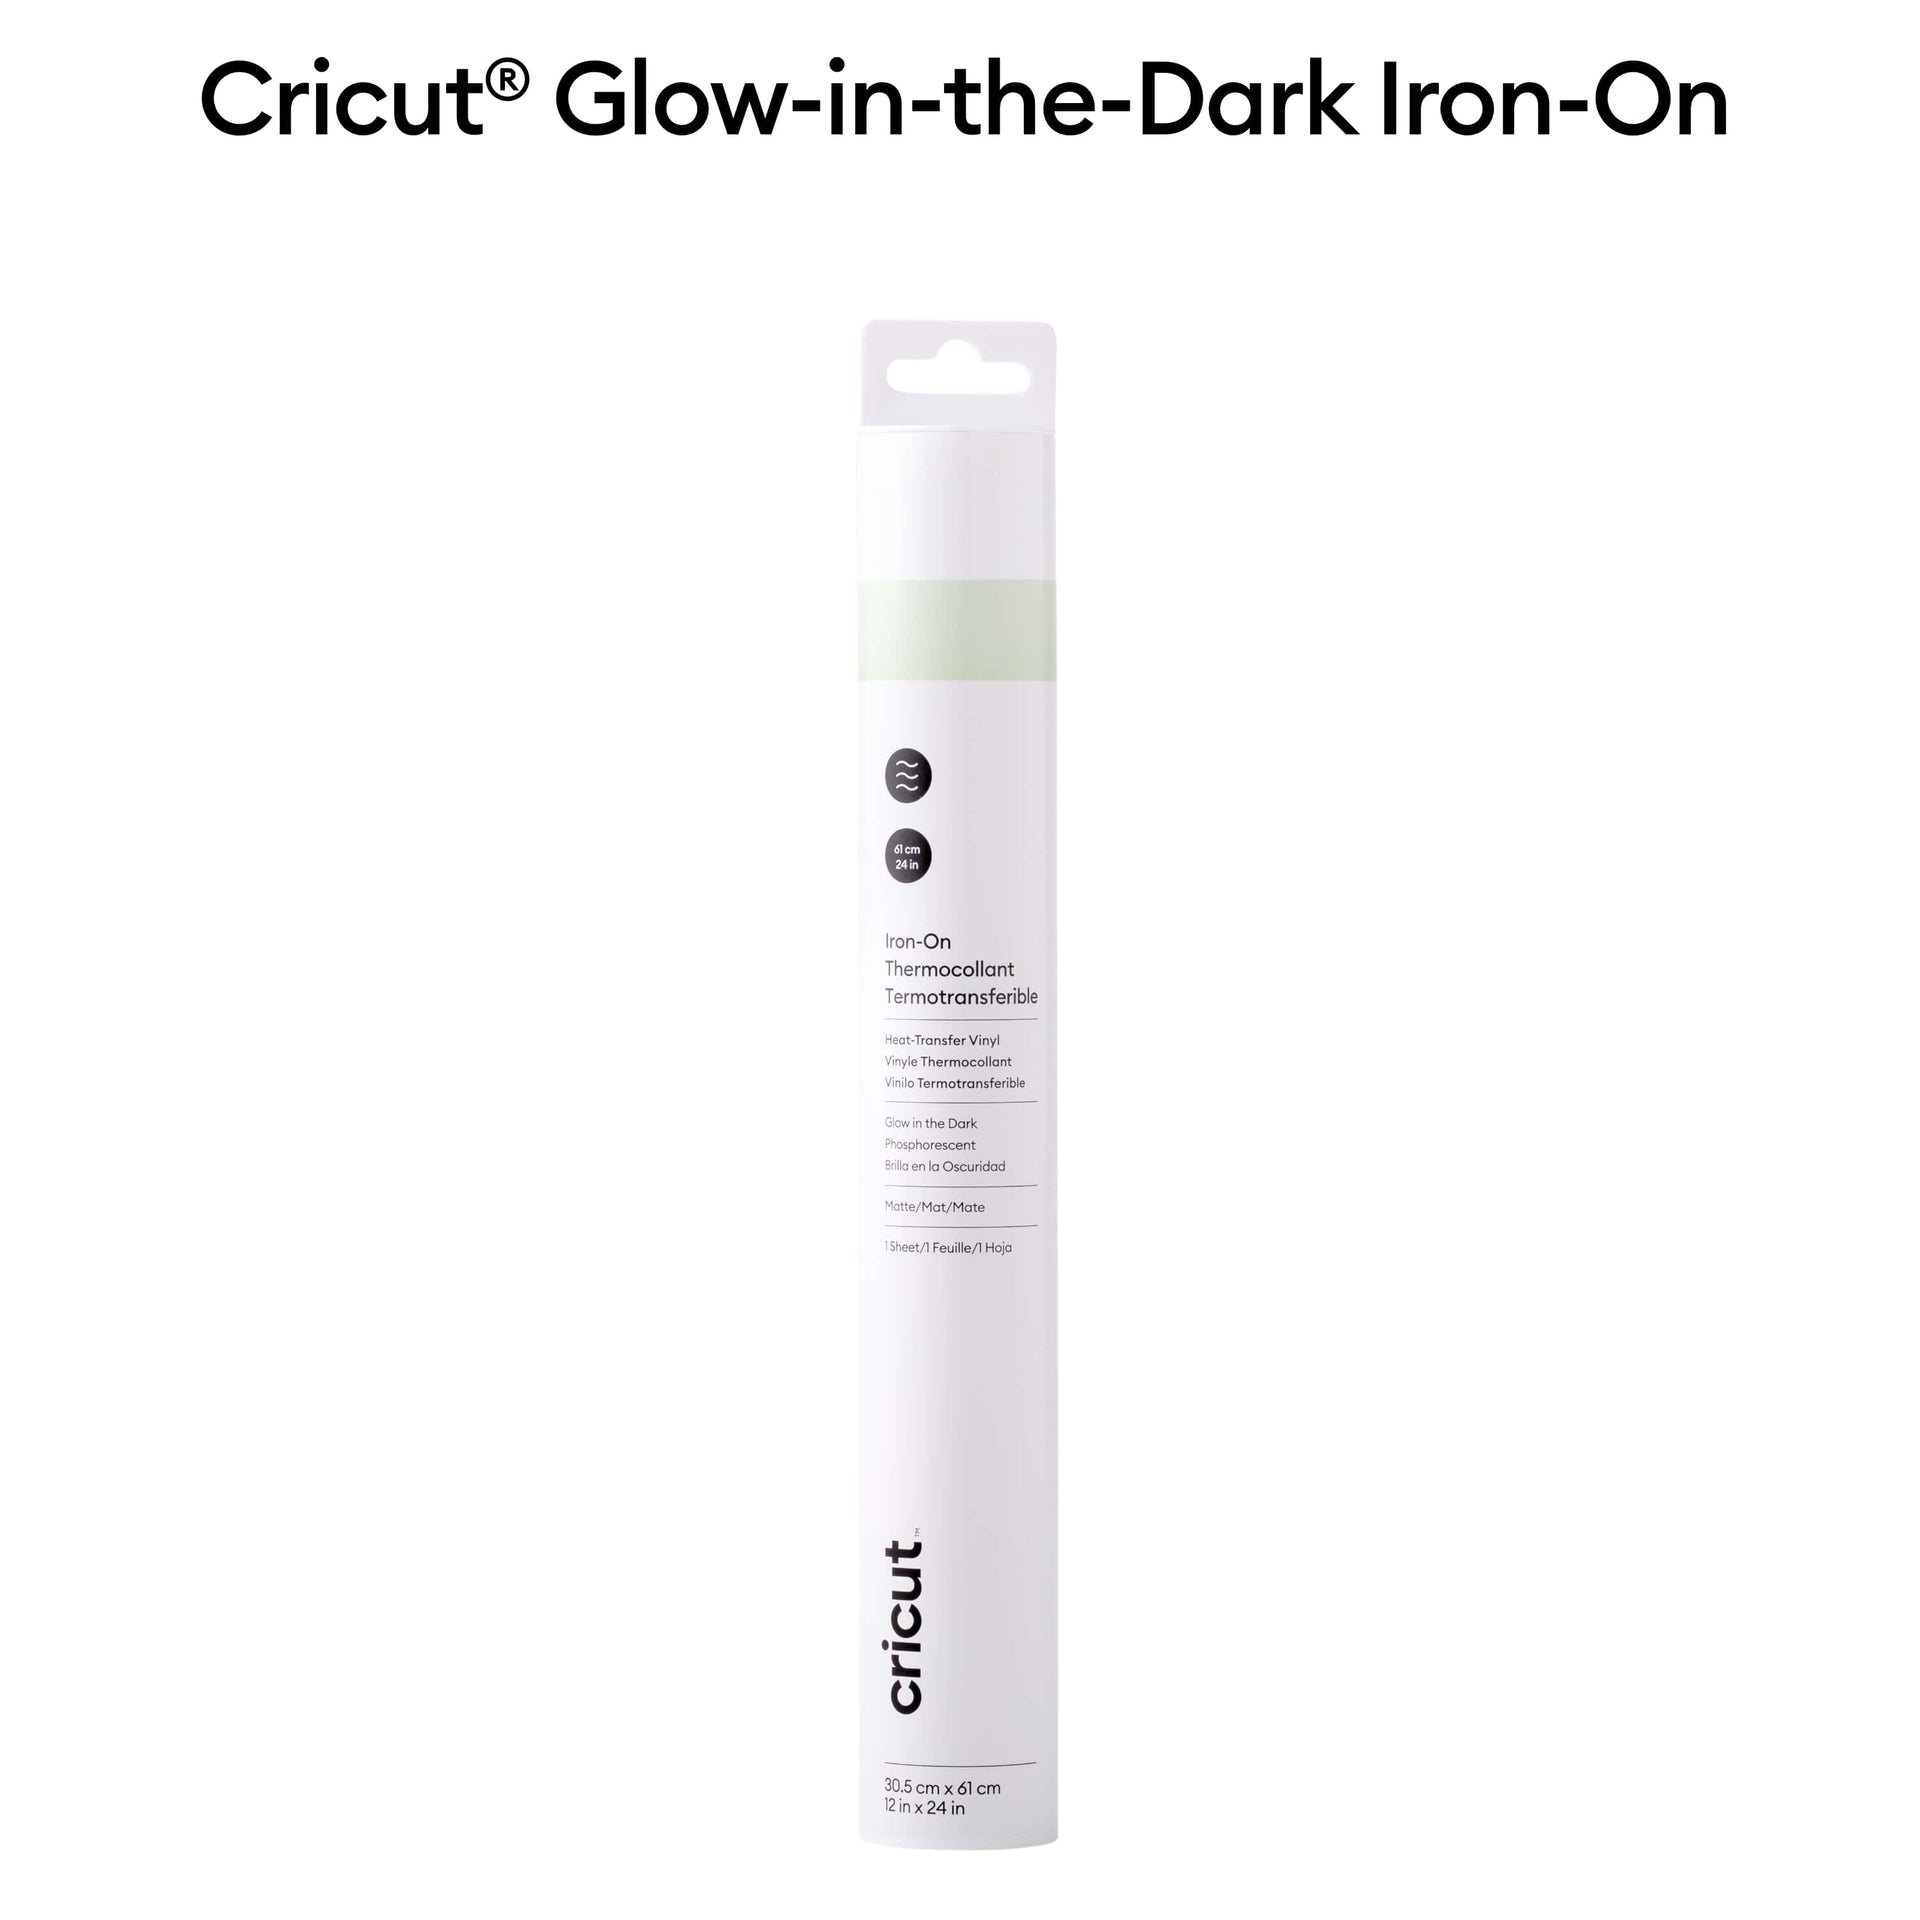 Cricut Glow-in-the Dark Iron-On - Damaged Package